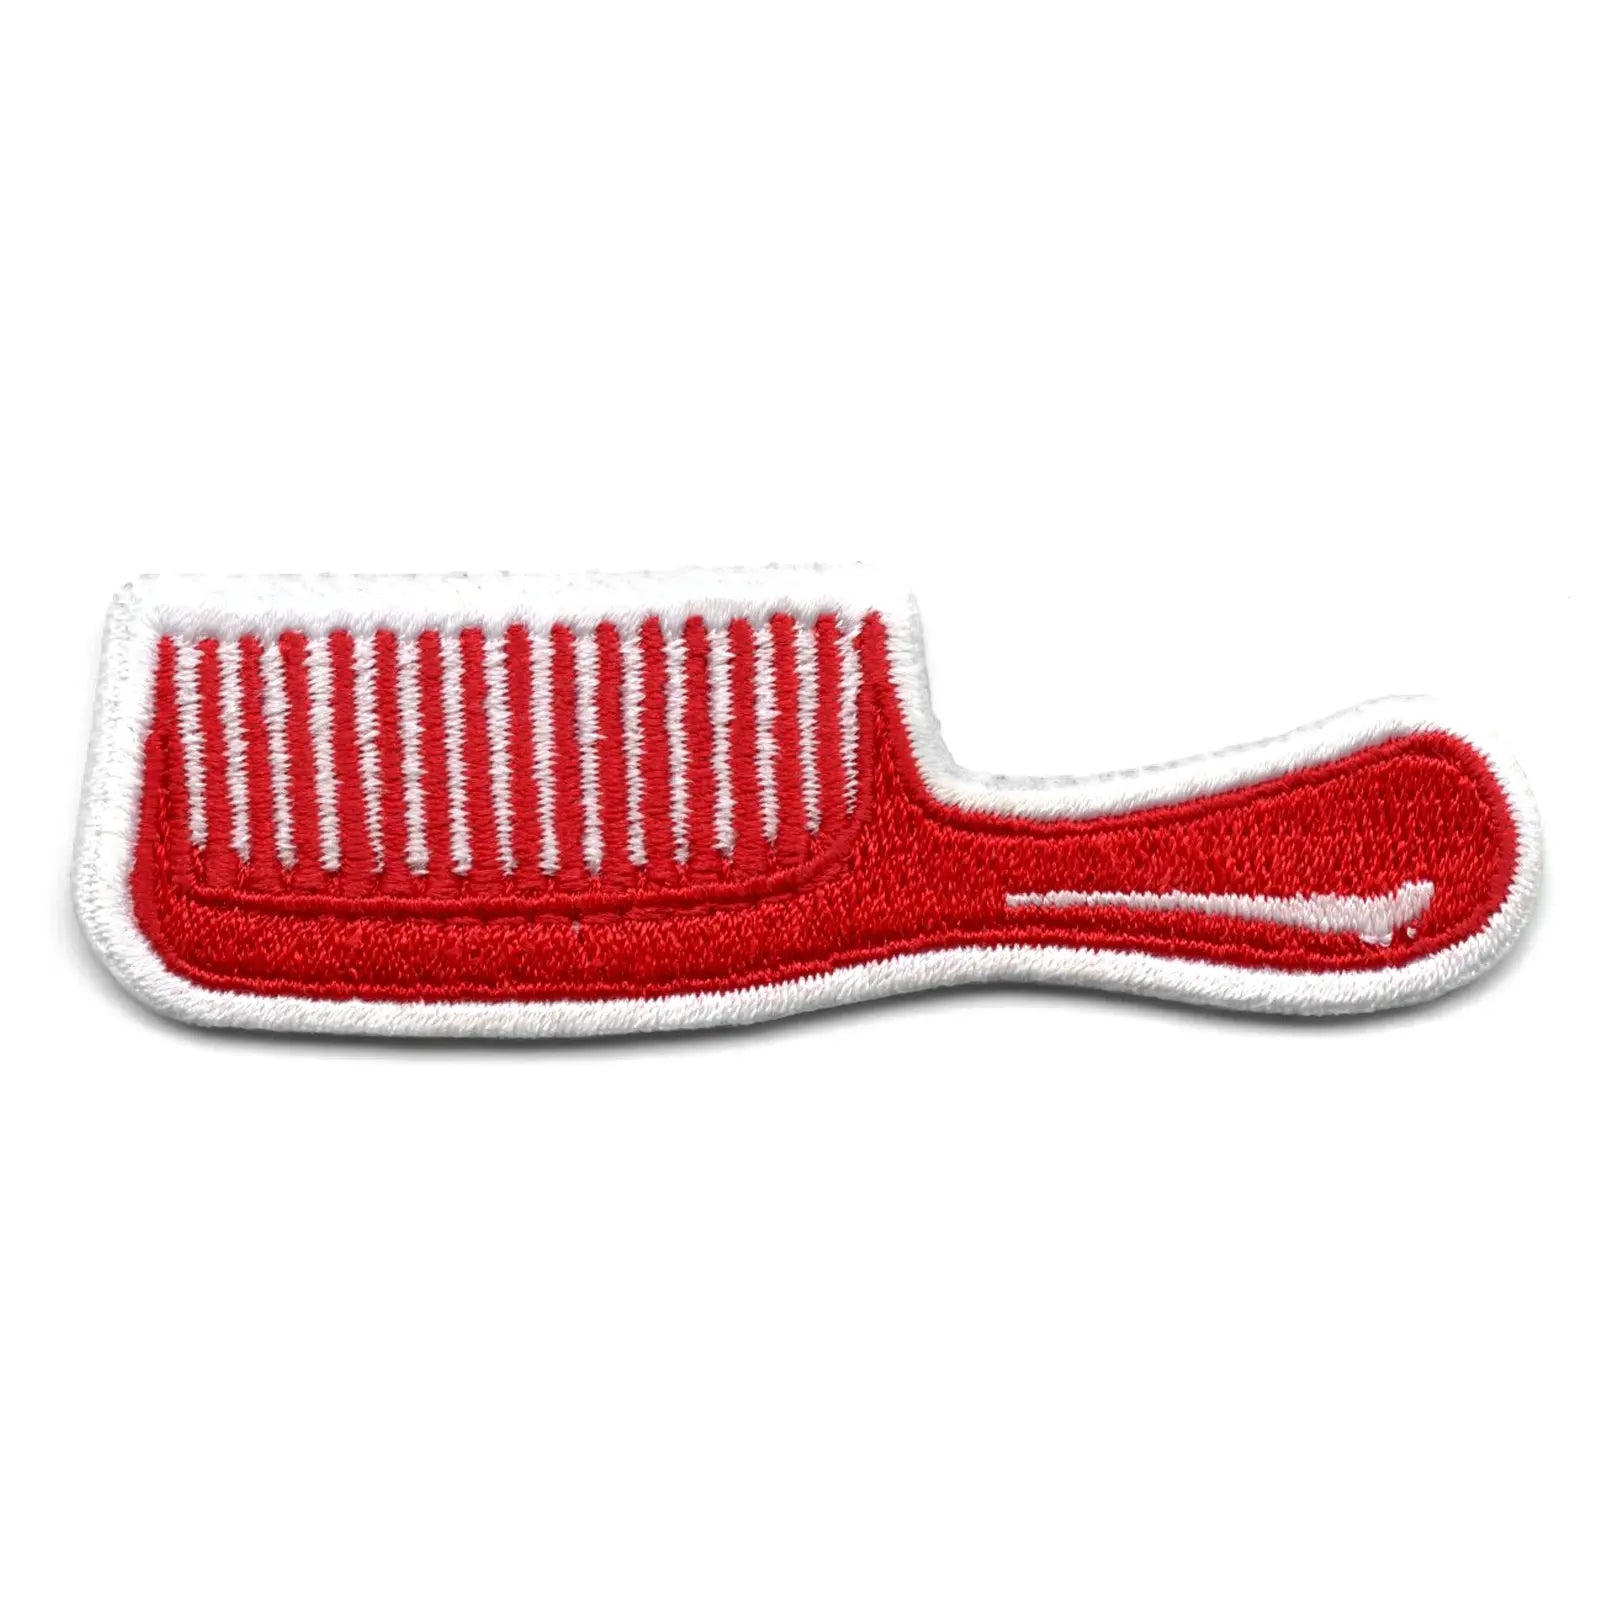 Comb Embroidered Iron On Patch 